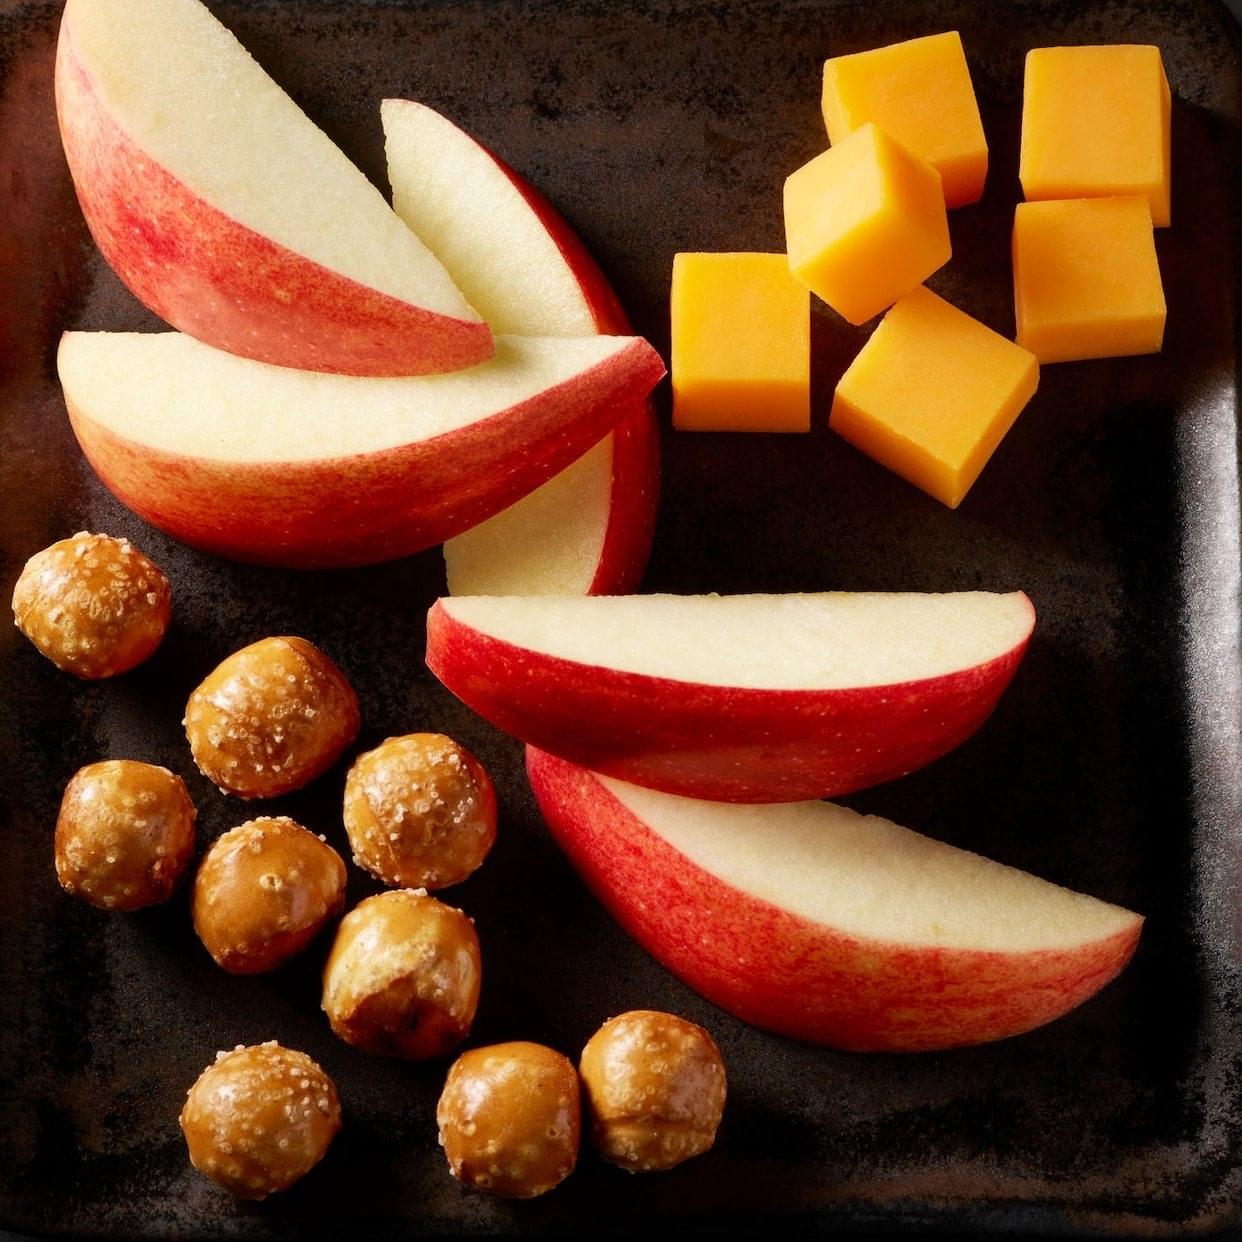 Starbucks Prosnax Gala Apples, Cheddar Cheese, and Pretzels Snack Tray Nutrition Facts